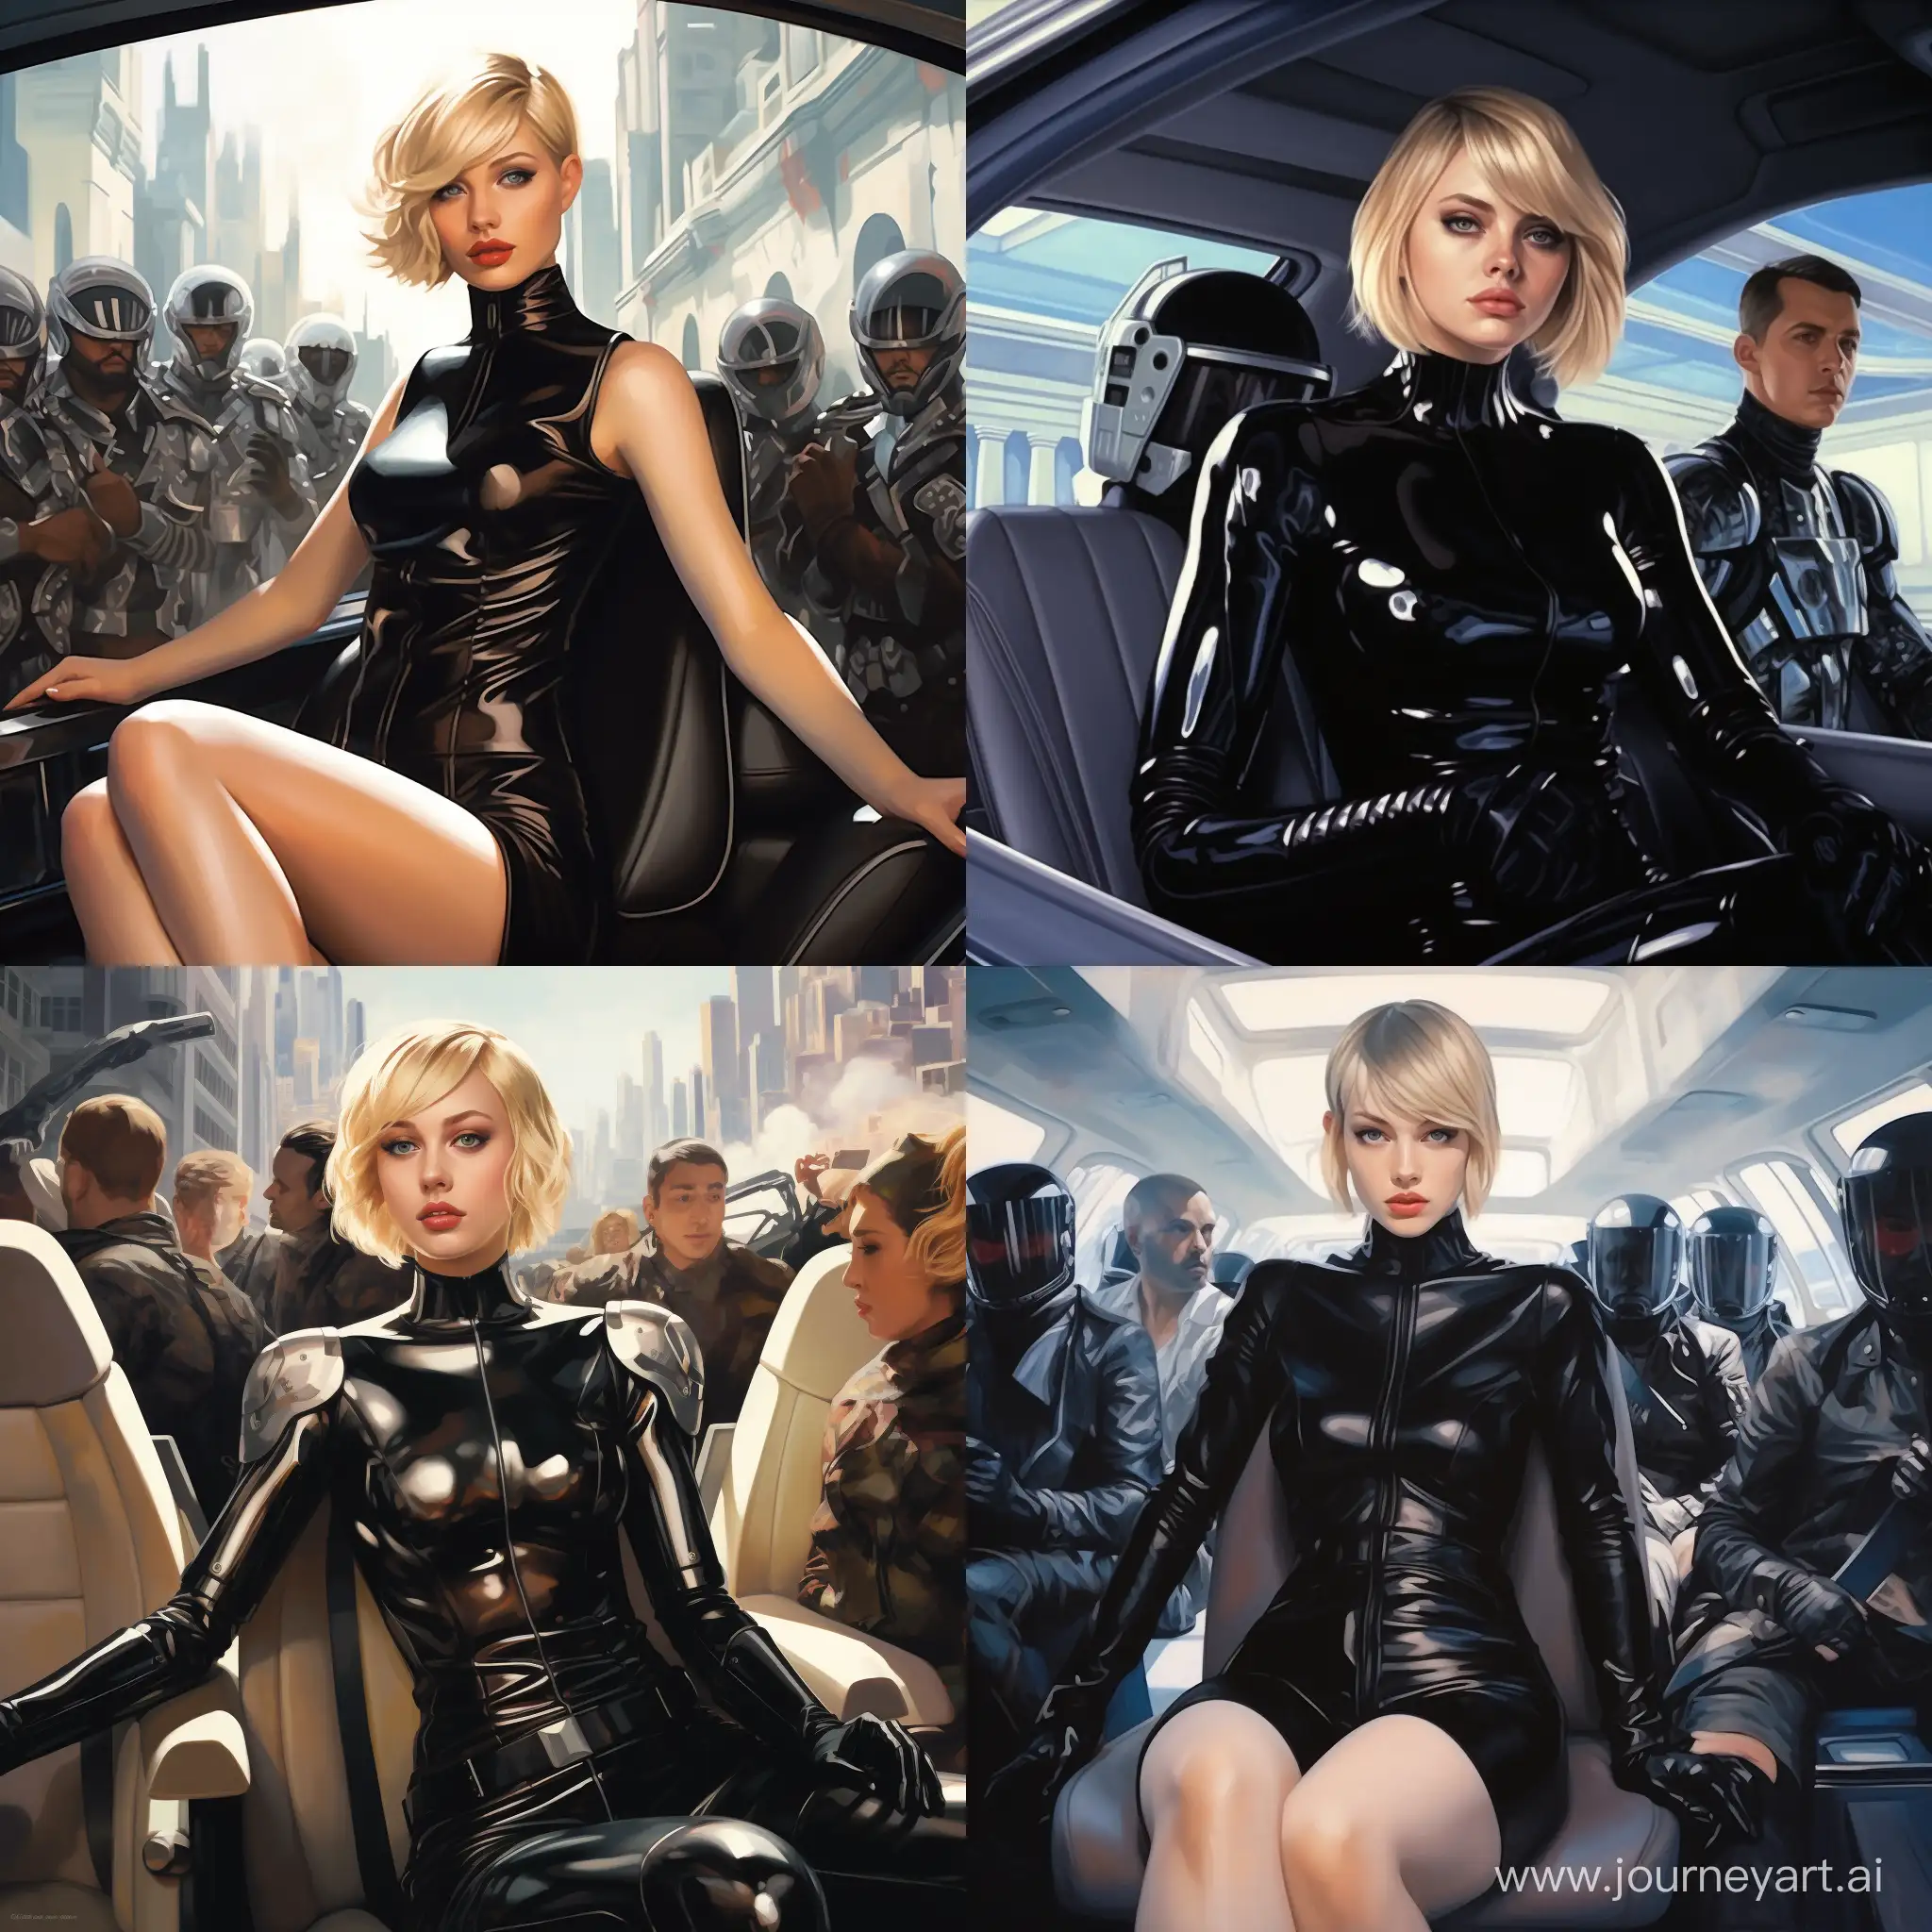 Epic-BlackClad-Woman-in-Futuristic-Limousine-with-WhiteGloved-Motorcyclist-Escort